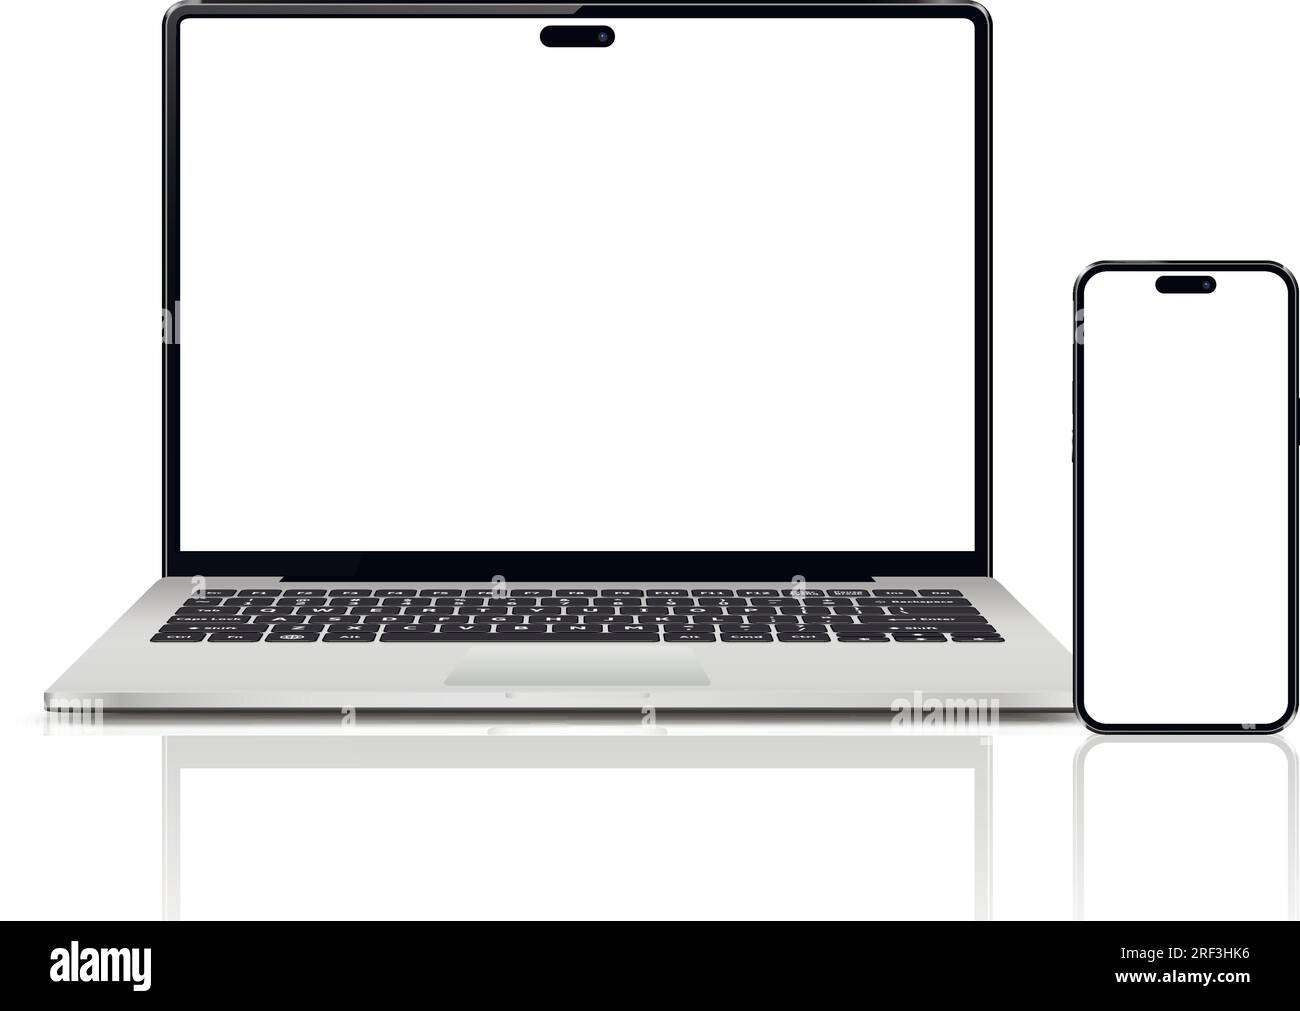 Laptop computer and mobile phone mockups isolated on white background Stock Vector